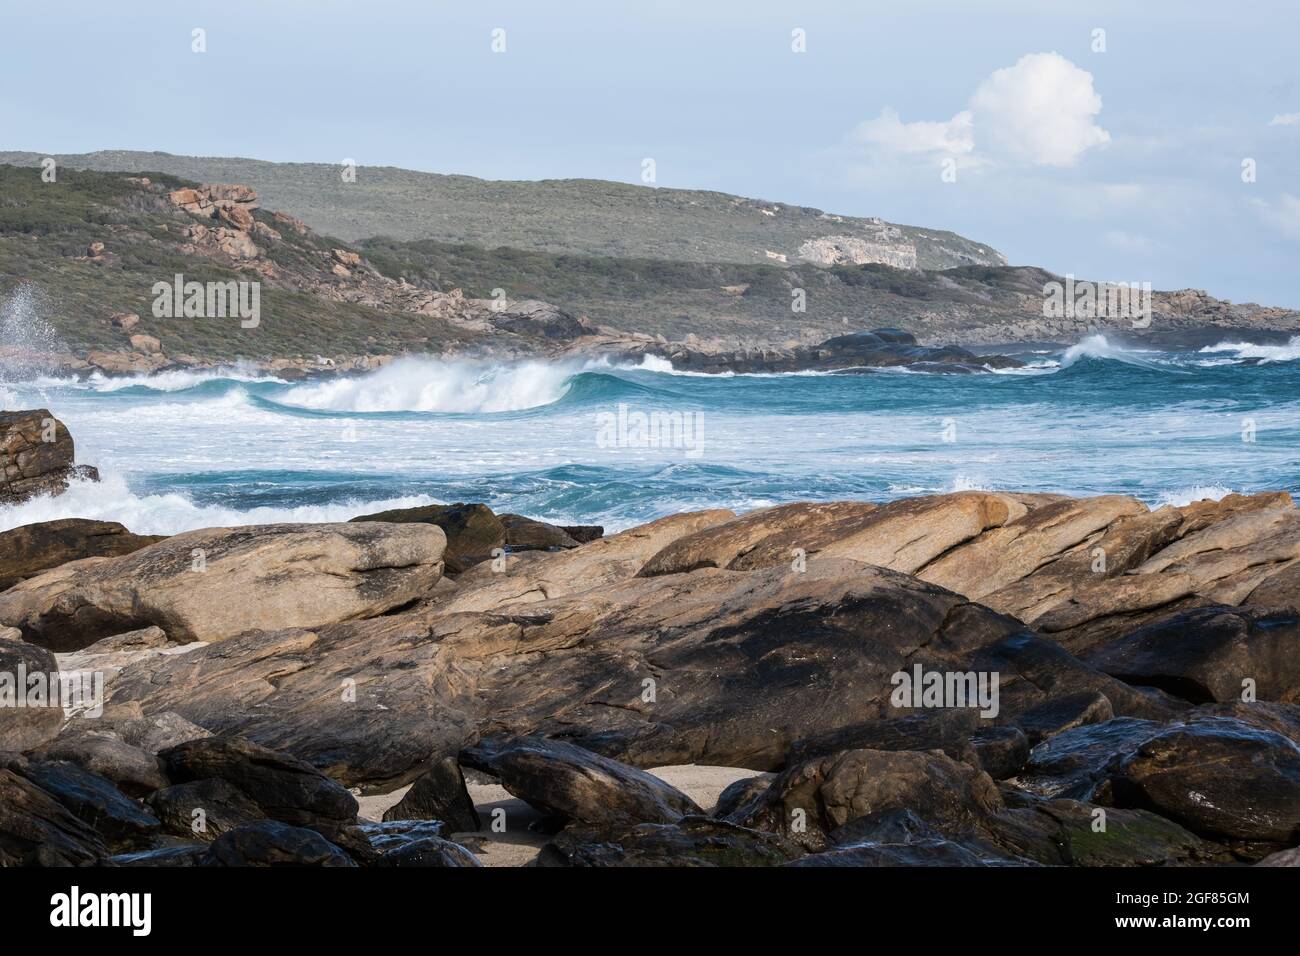 Looking south over rocks to waves at Redgate Surf break, Calgardup Bay, Redgate, Western Australia Stock Photo